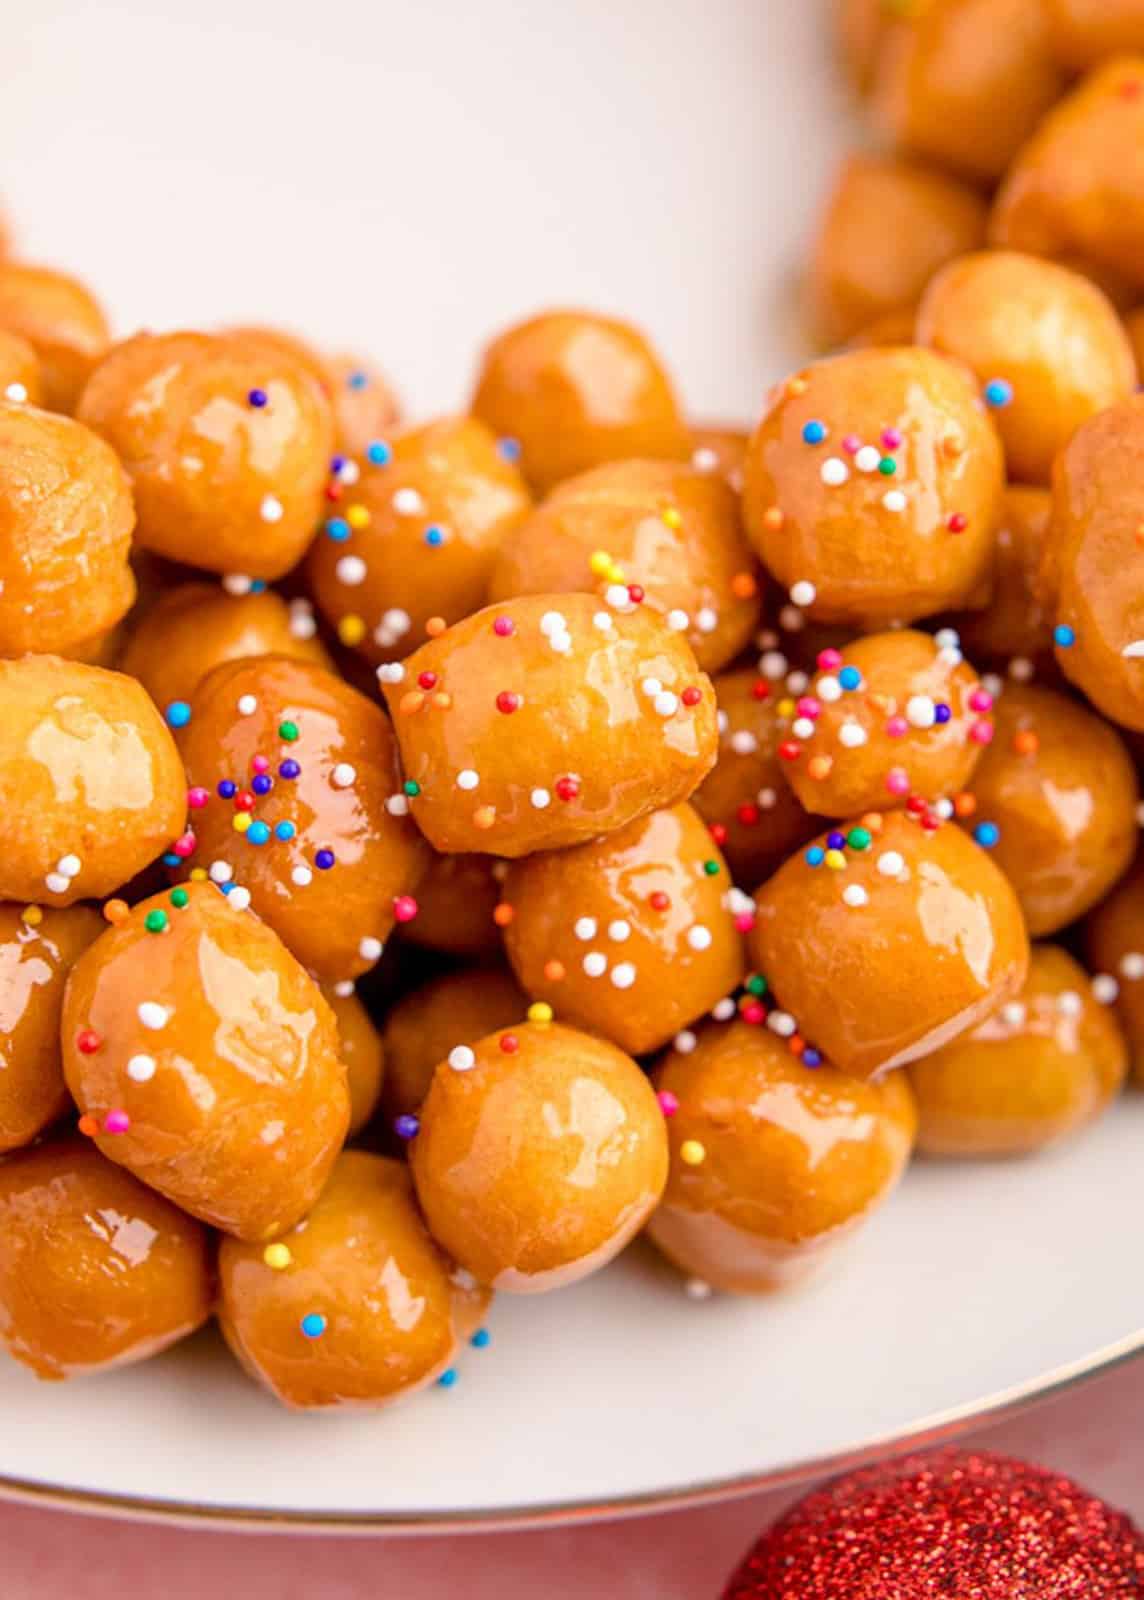 Close up of Struffoli showing the coated balls and sprinkles.